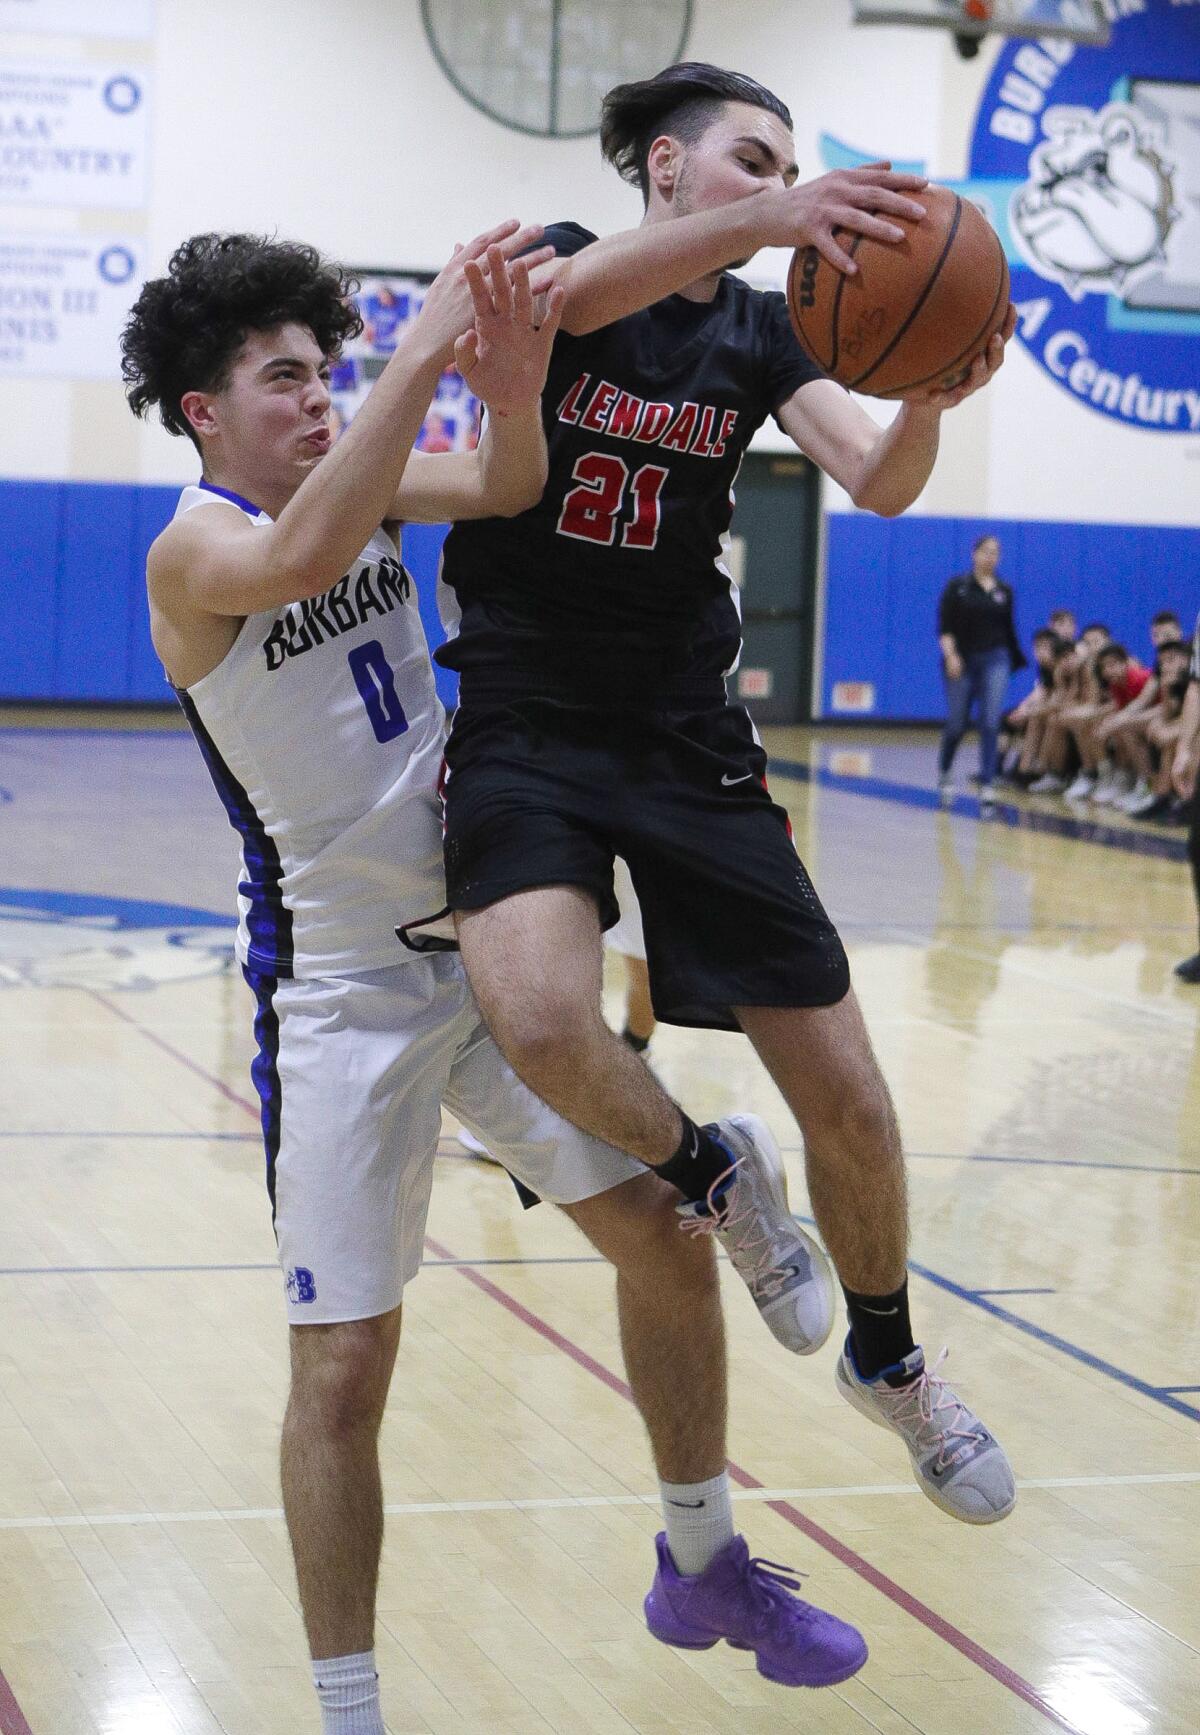 Glendale High's Manouk Manoukian comes down with a rebound over Burbank's J.G. Lambert in Friday's Pacific League game.